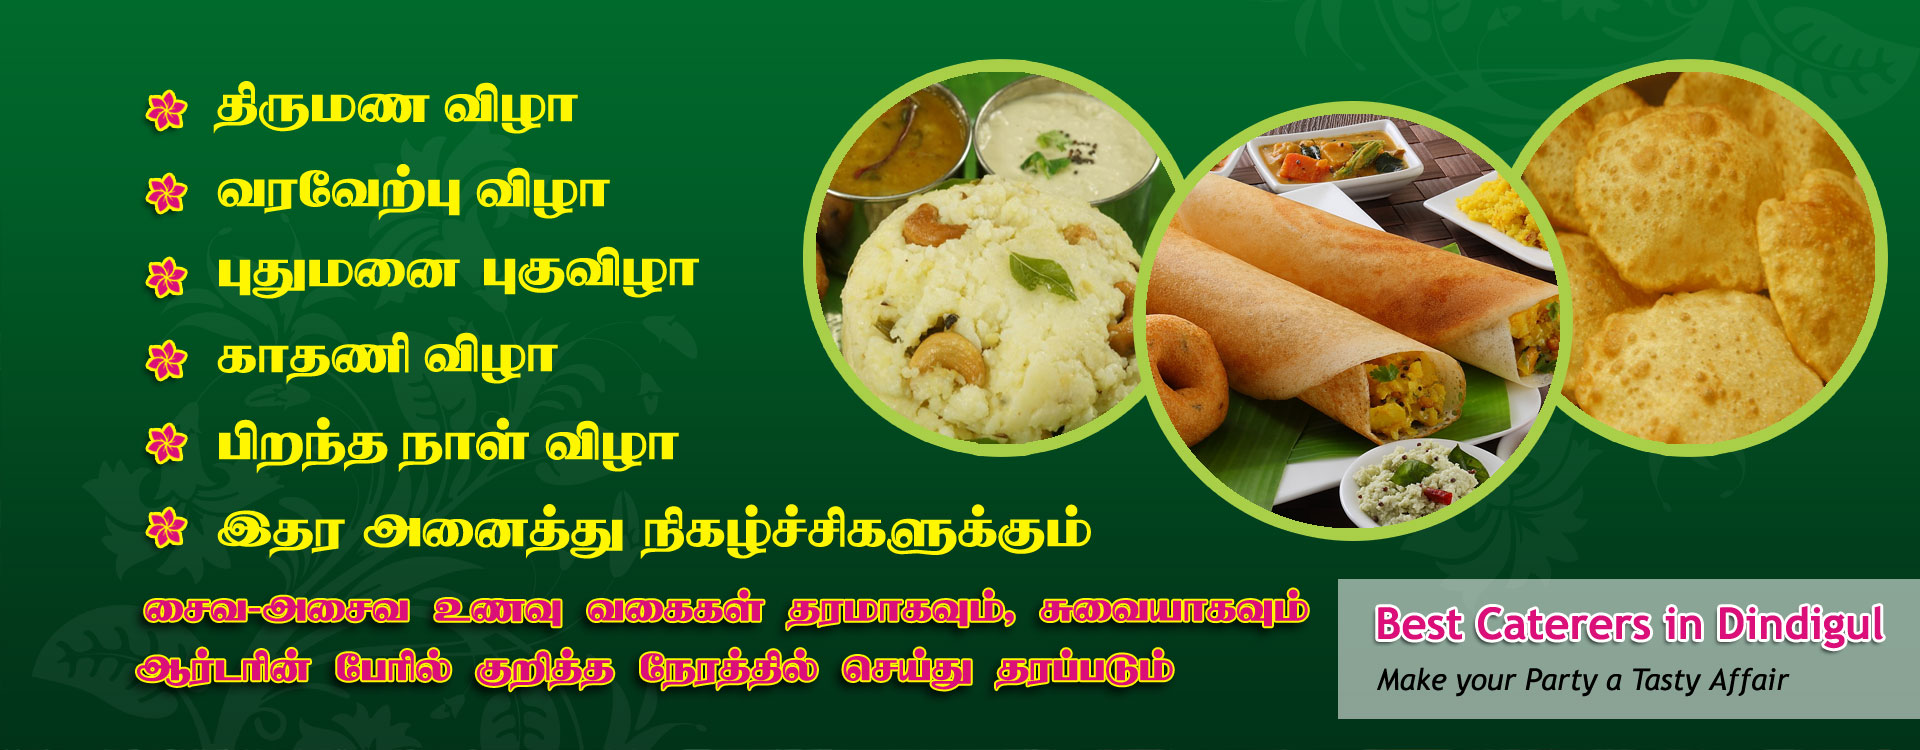 catering services dindigul